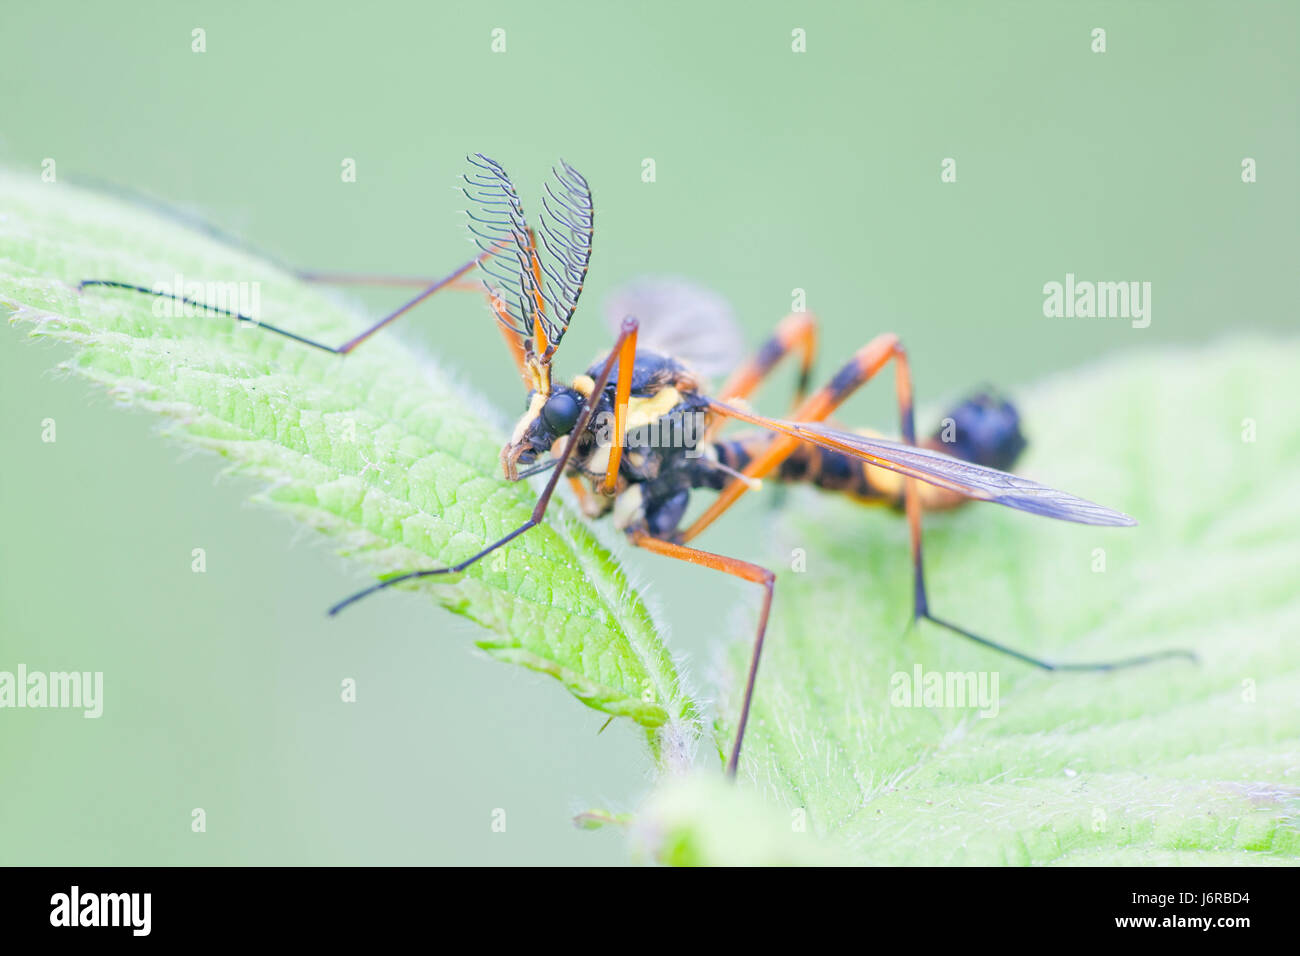 macro close-up macro admission close up view cranefly gnats insect insects Stock Photo